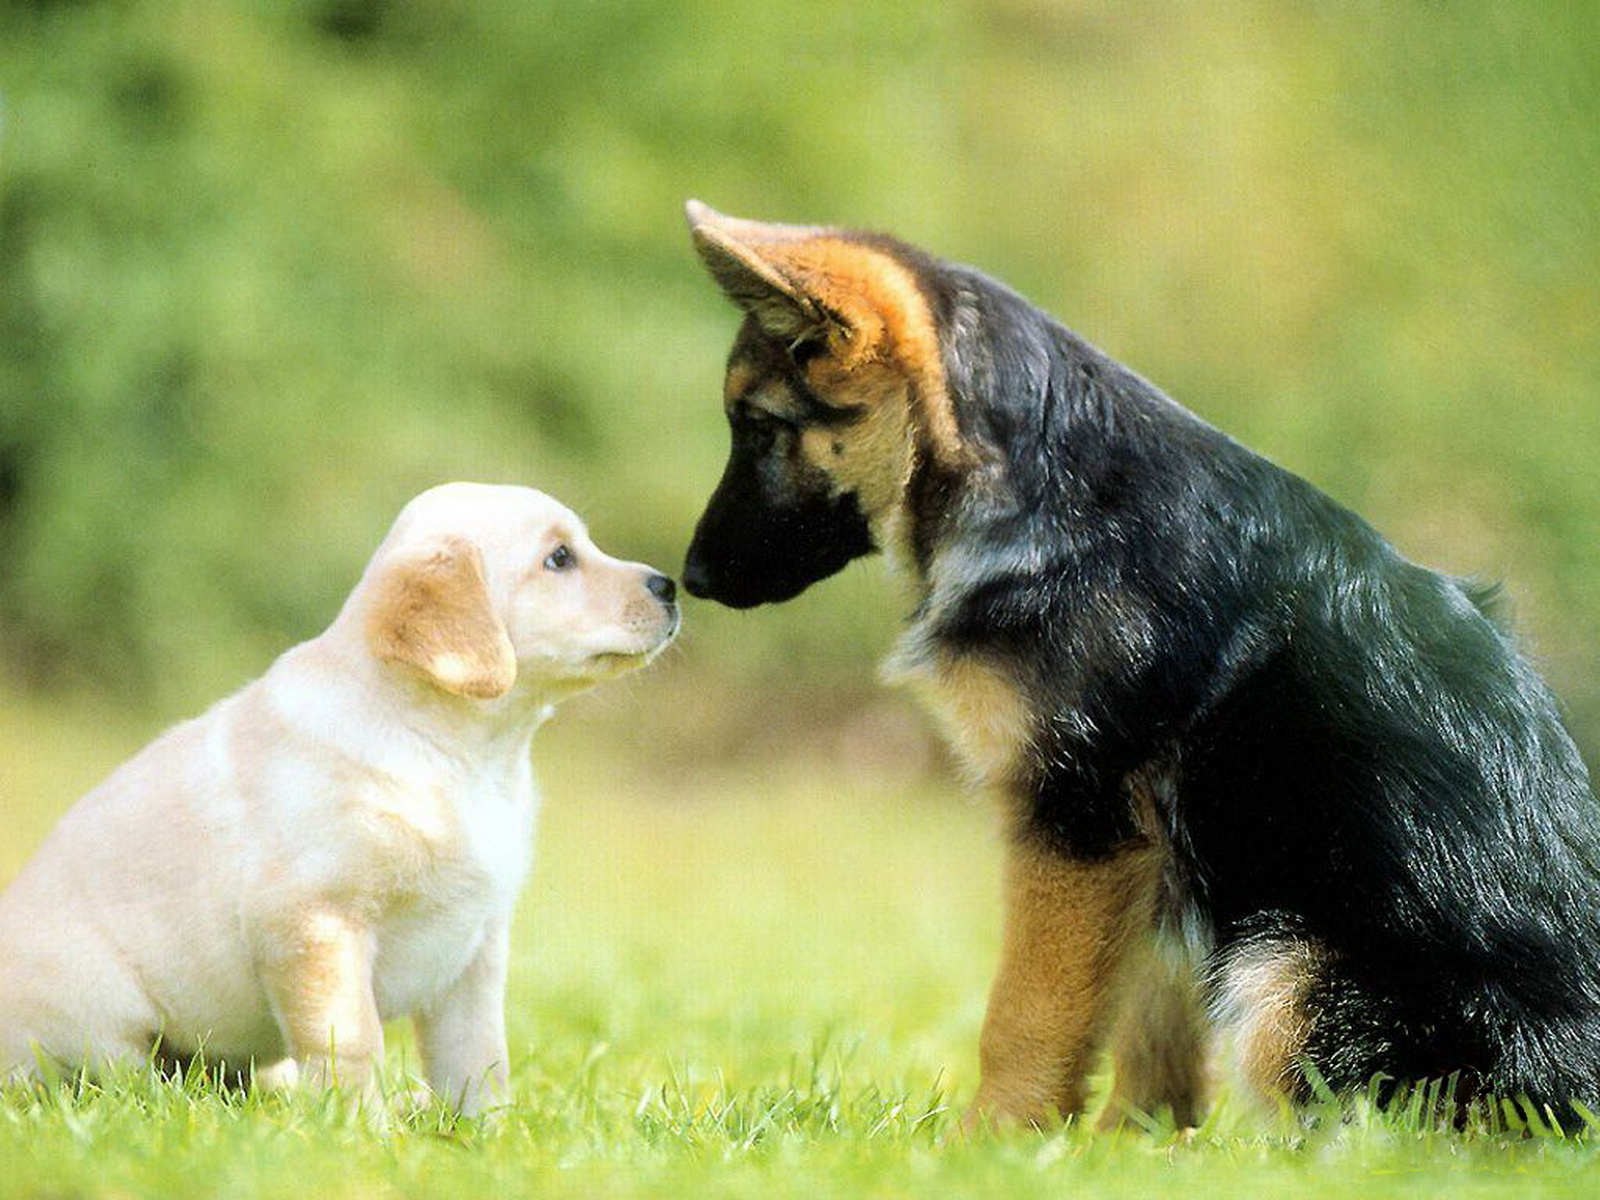 Cute Dogs Care And Affection Amongst Love Contrast